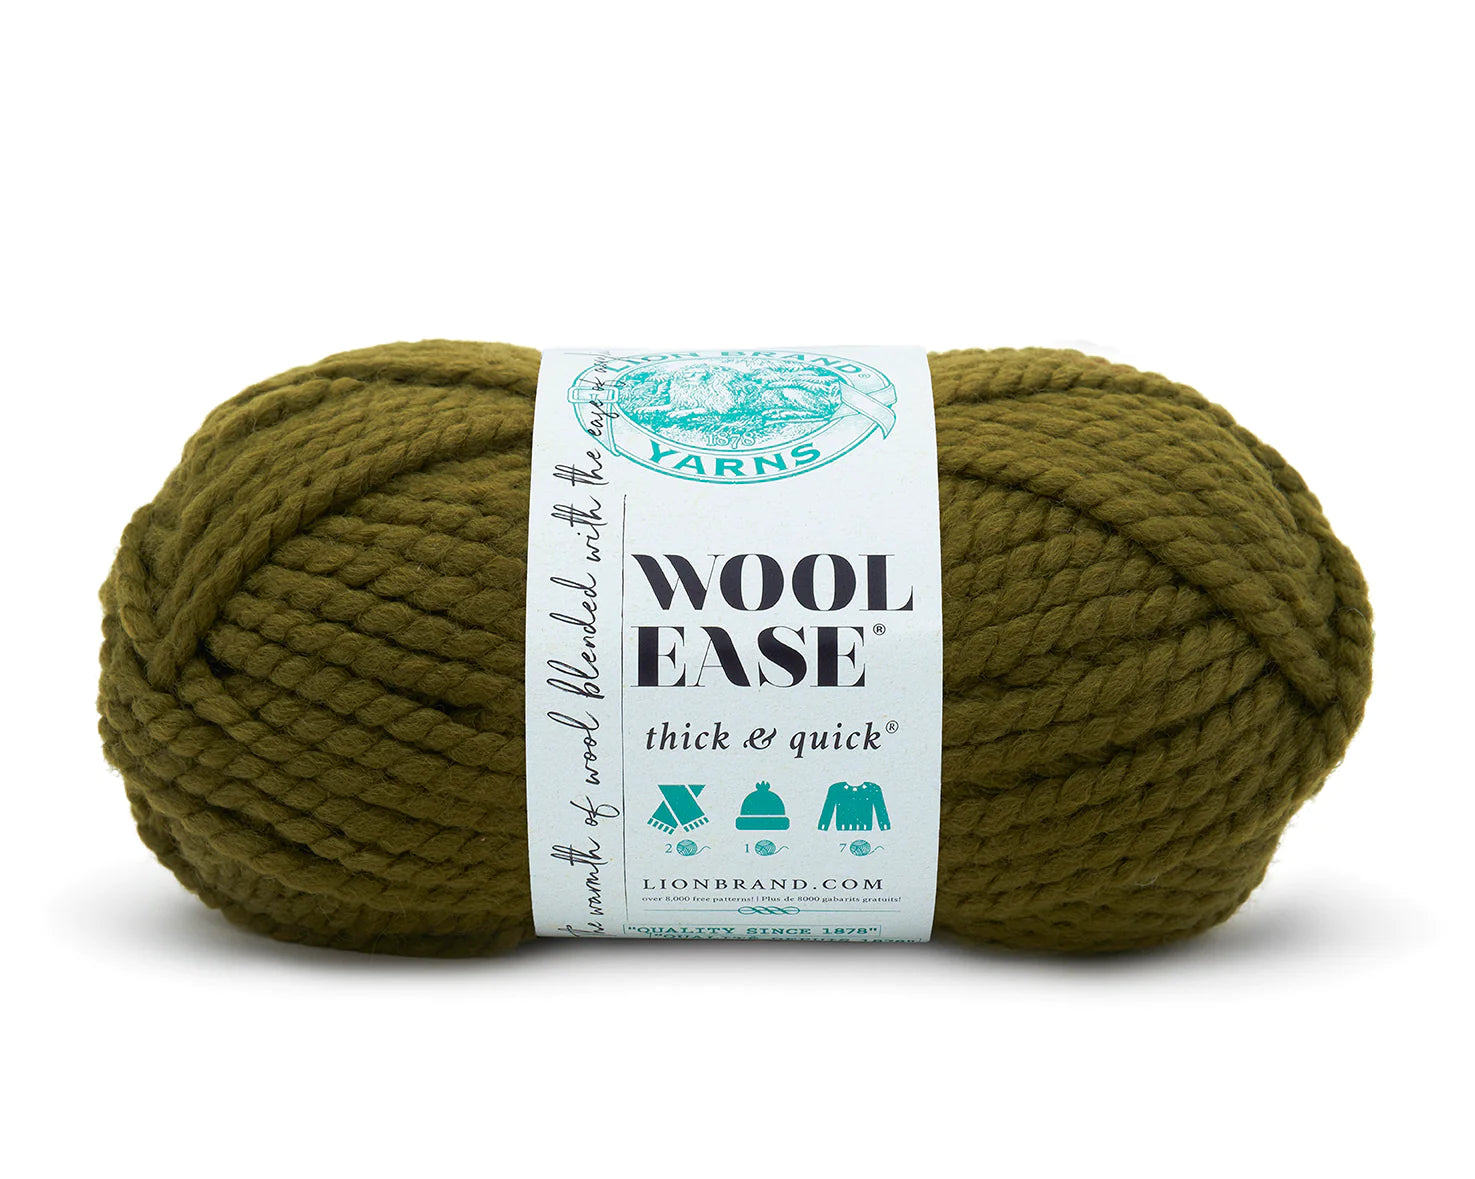 Lion Brand Wool-Ease Thick & Quick Yarn-Succulent, 1 count - Gerbes Super  Markets